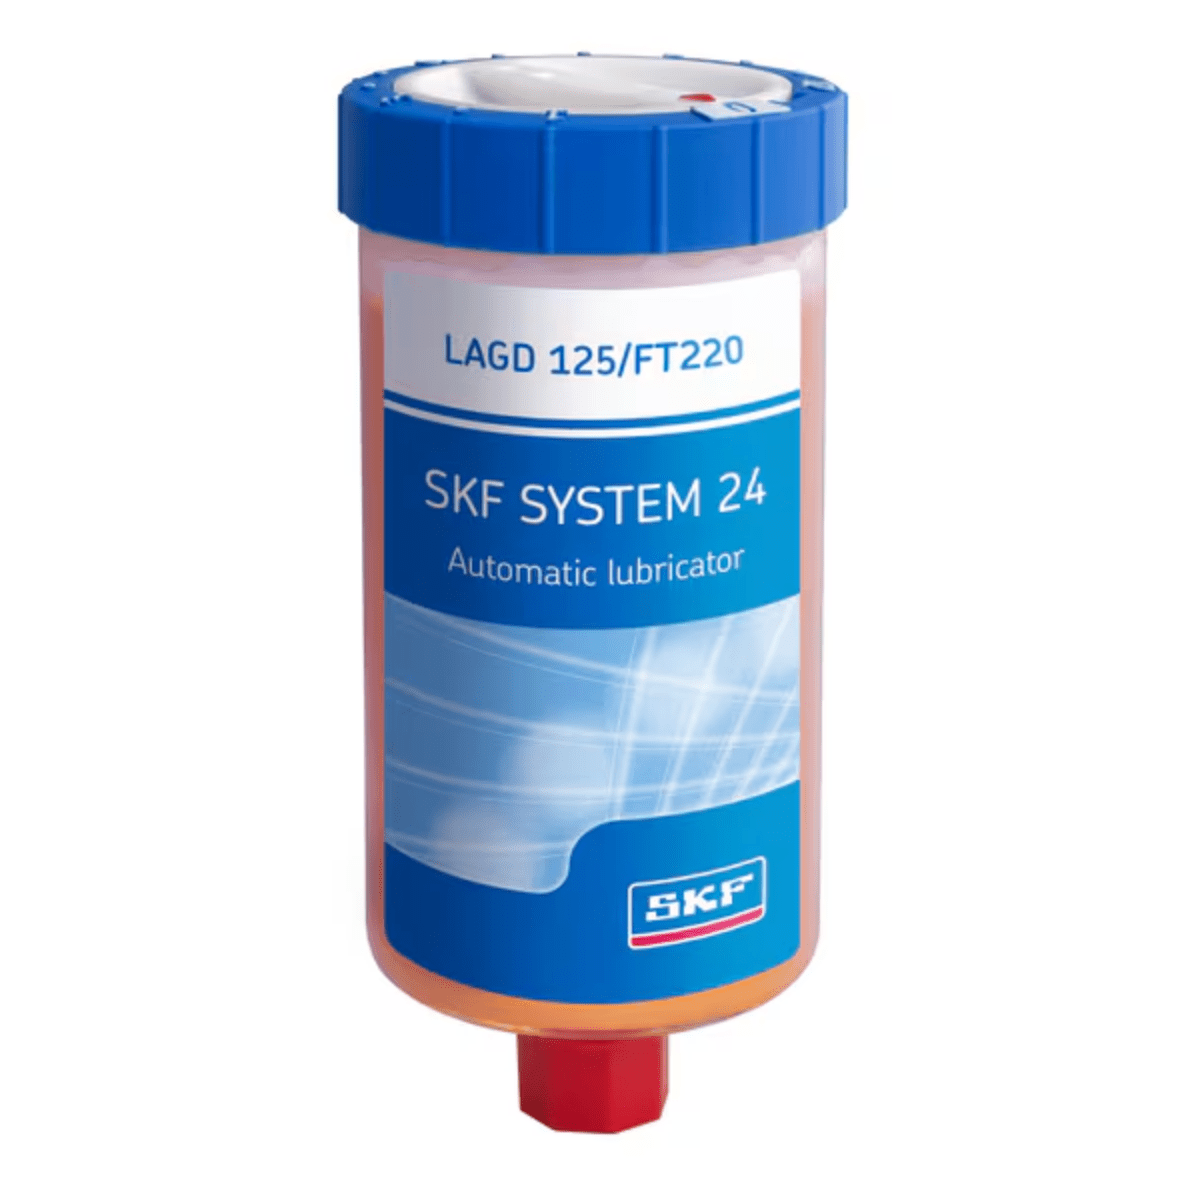 SKF LAGD 125/FT220 Automatic lubricator with LFFT 220 Food grade, NSF H1 approved oil, 125ml - Apollo Industries llc